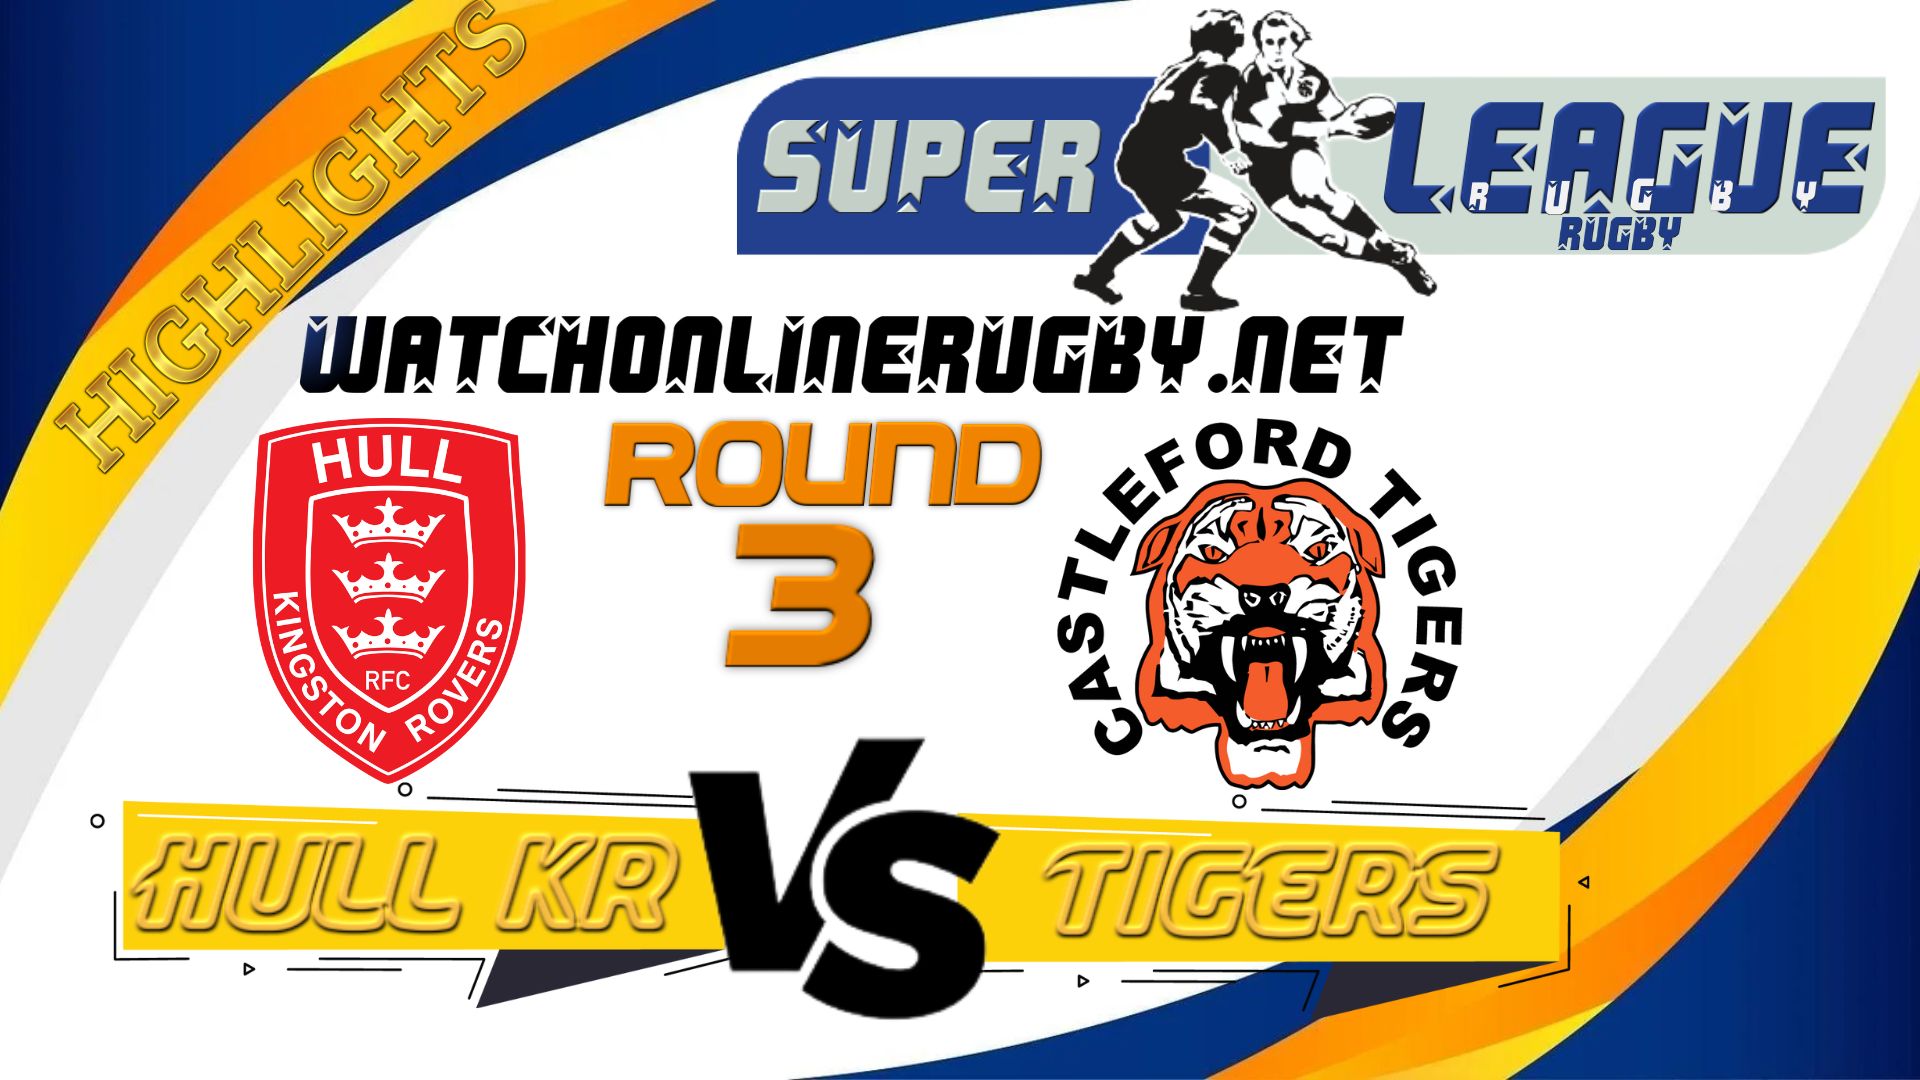 Hull KR Vs Castleford Tigers Super League Rugby 2022 RD 3